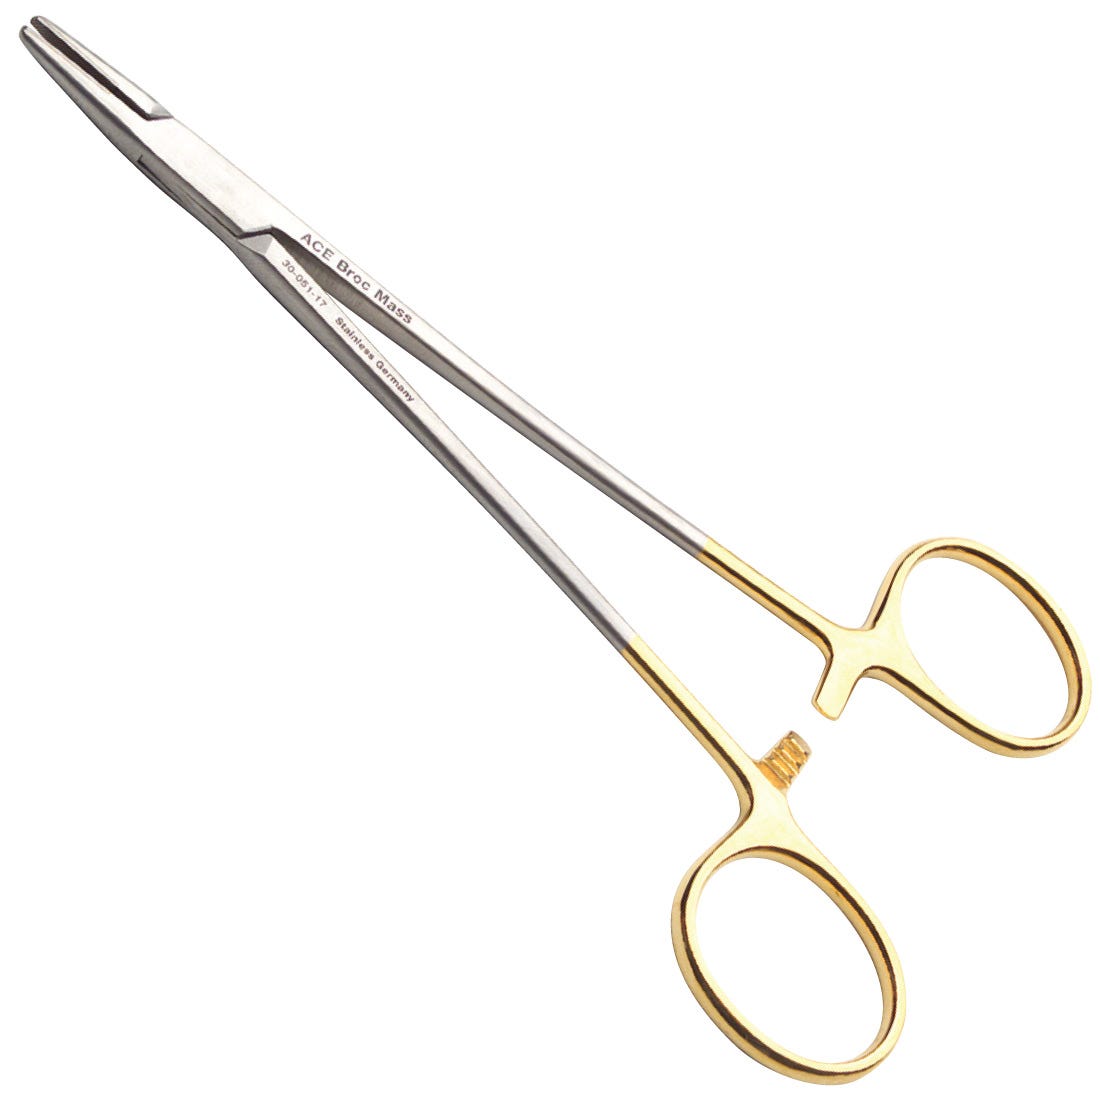 ACE Crile Wood Needle Holder, Straight, tungsten carbide tips 6"